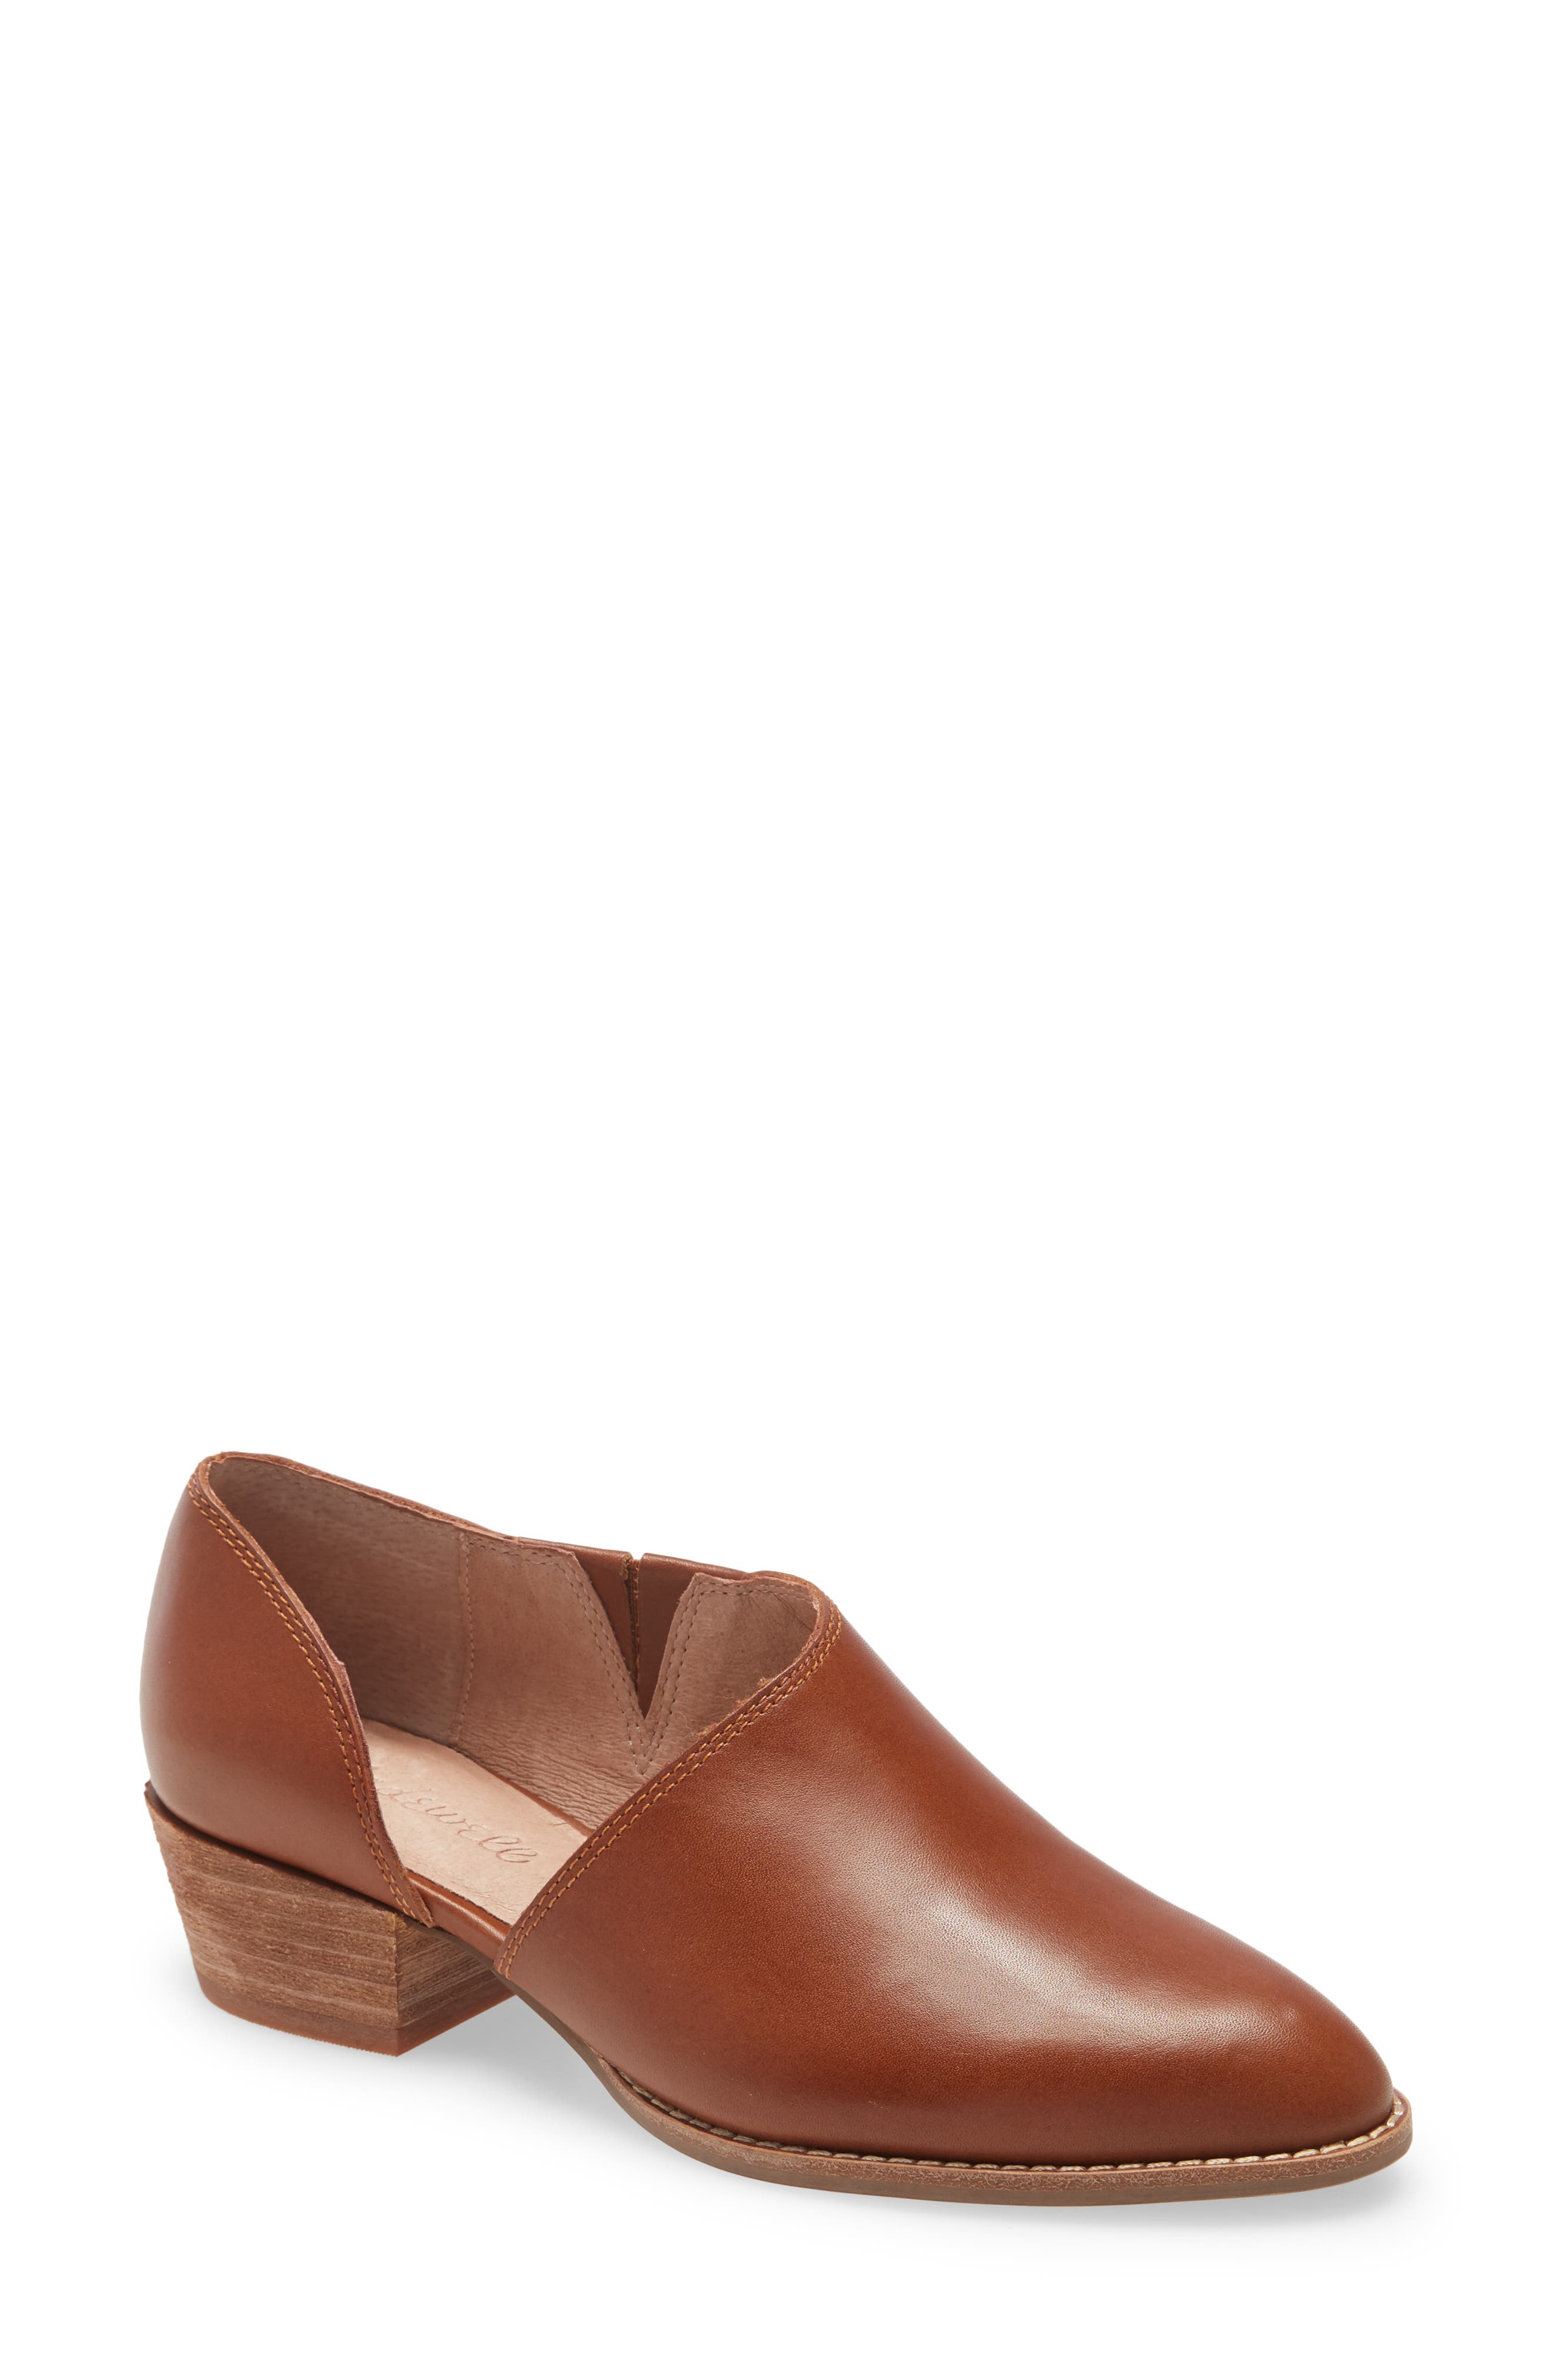 Madewell The Lucie Bootie | Nordstromrack